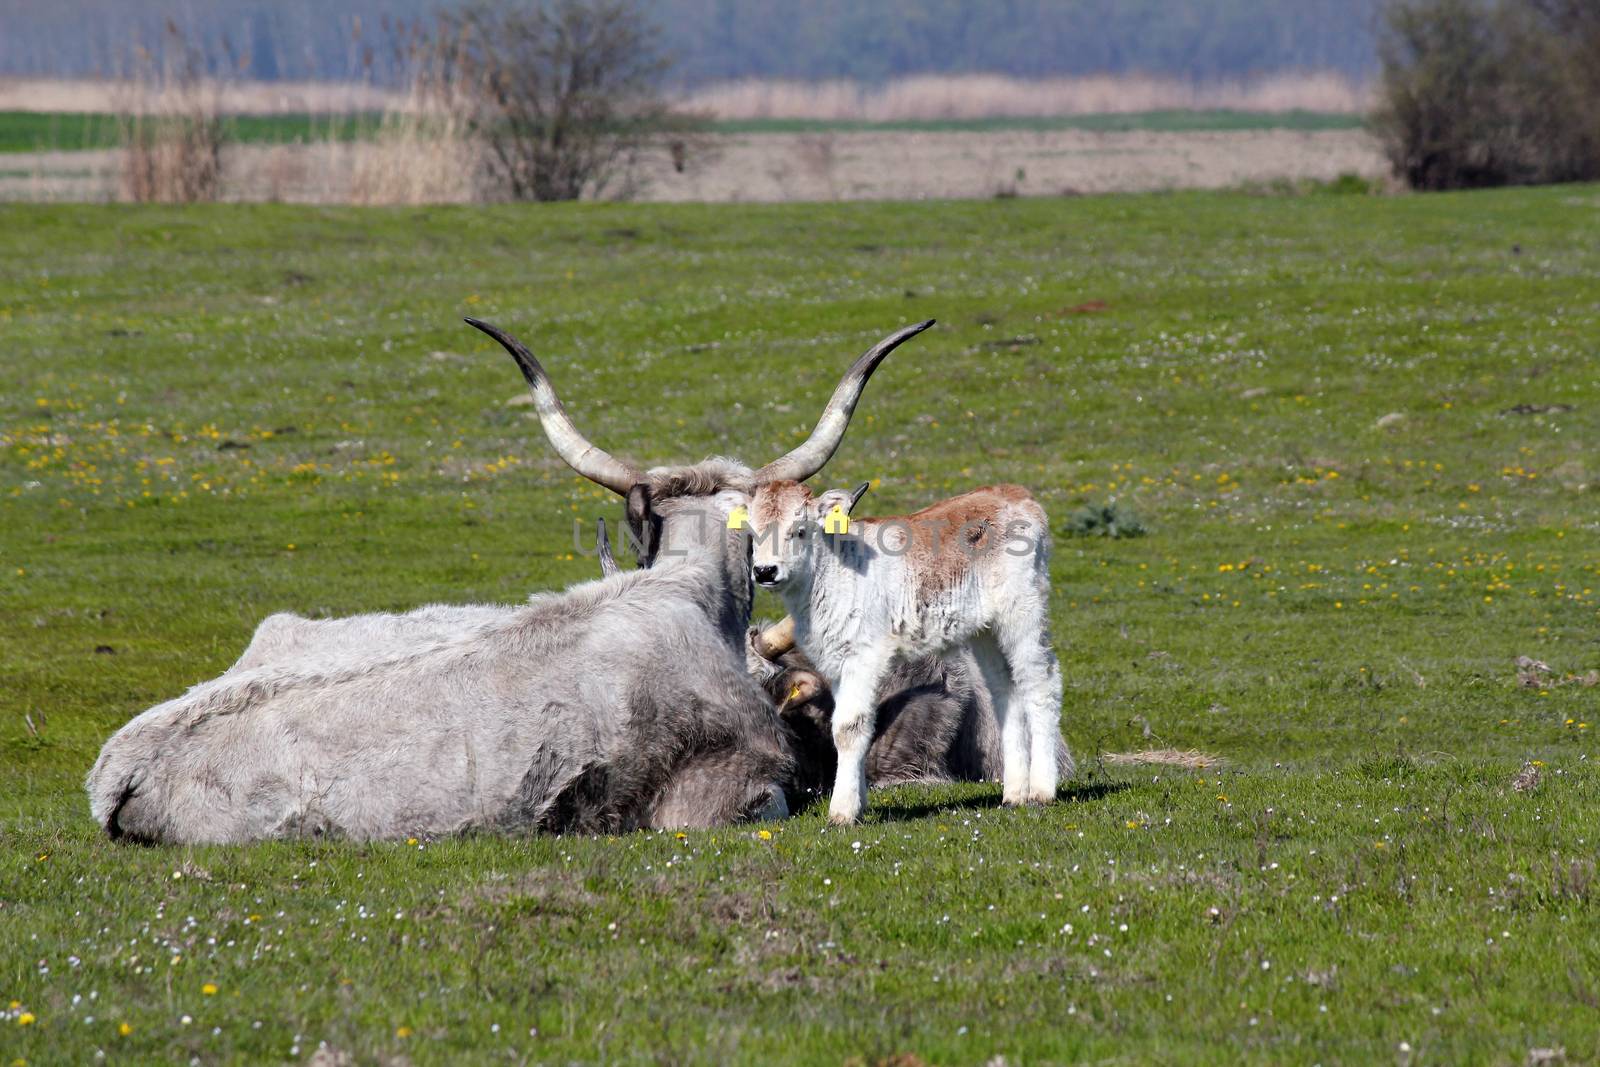 calf and cow on pasture